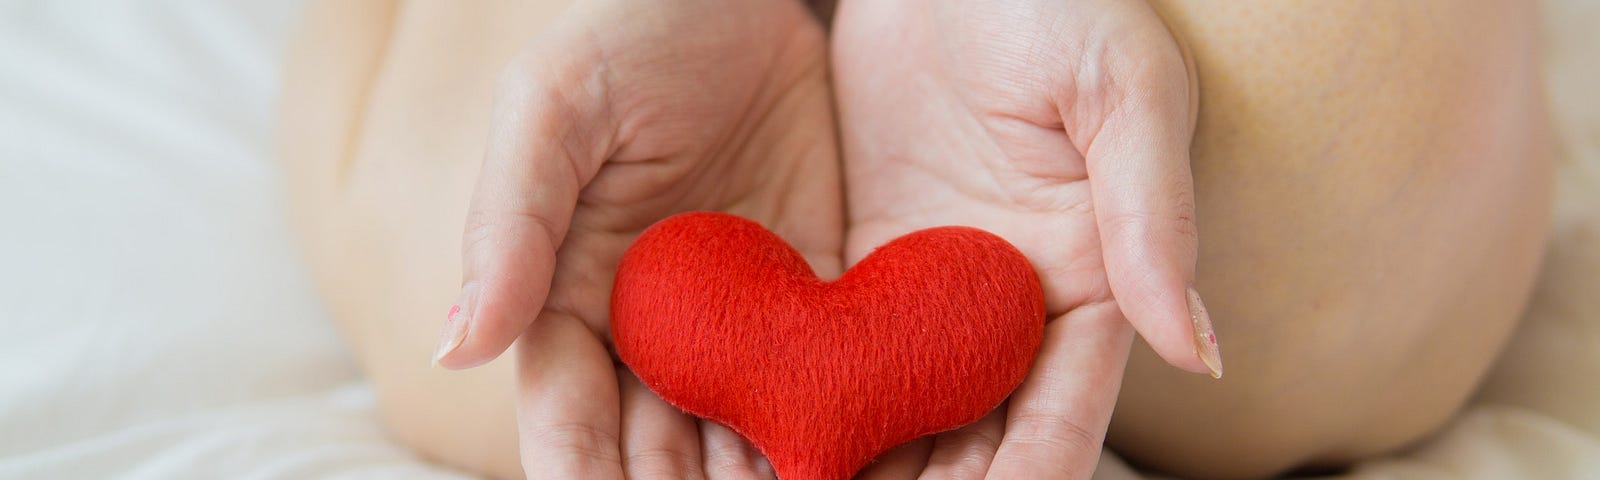 Female hands holding red heart. 3 Ways to let go of resentments.